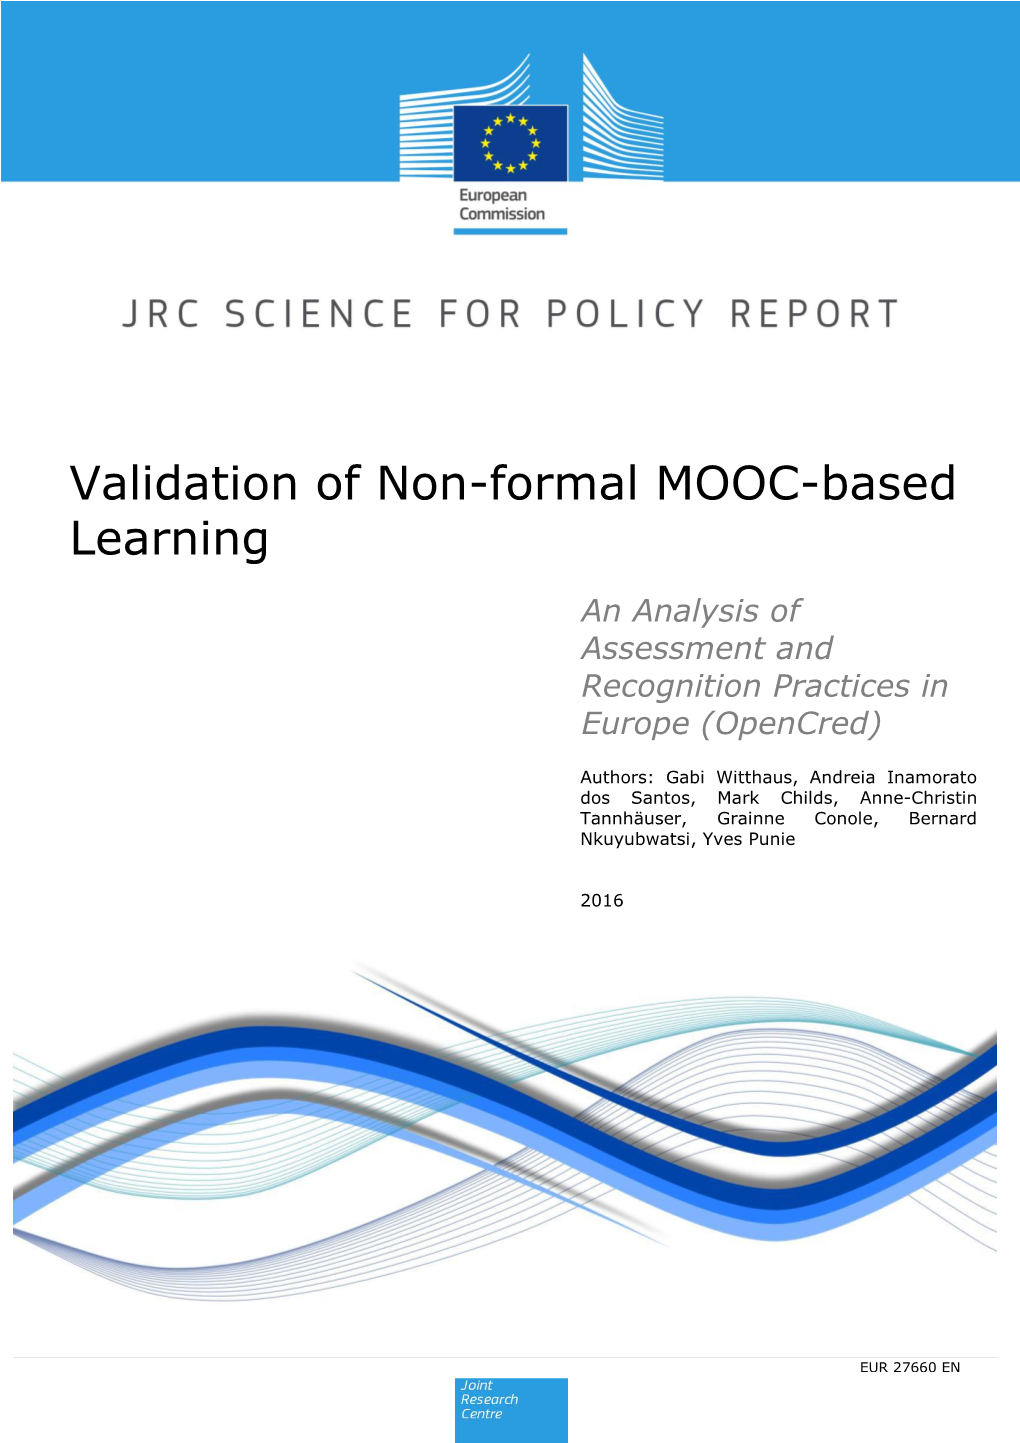 Validation of Non-Formal MOOC-Based Learning